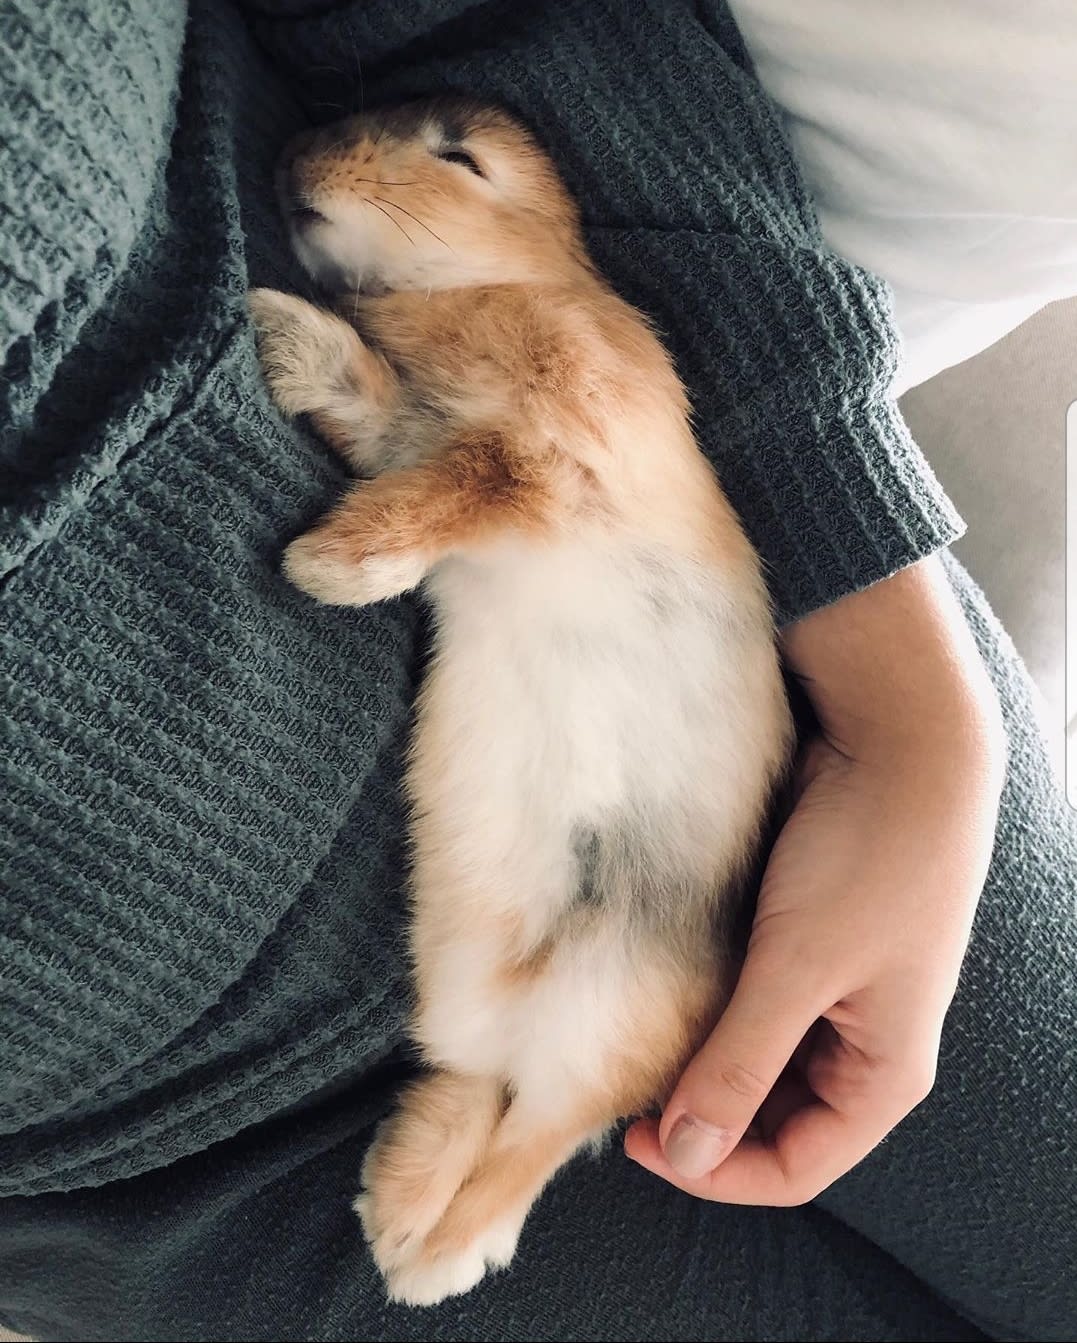 His first flop on my lap. Bun bun is comfy.